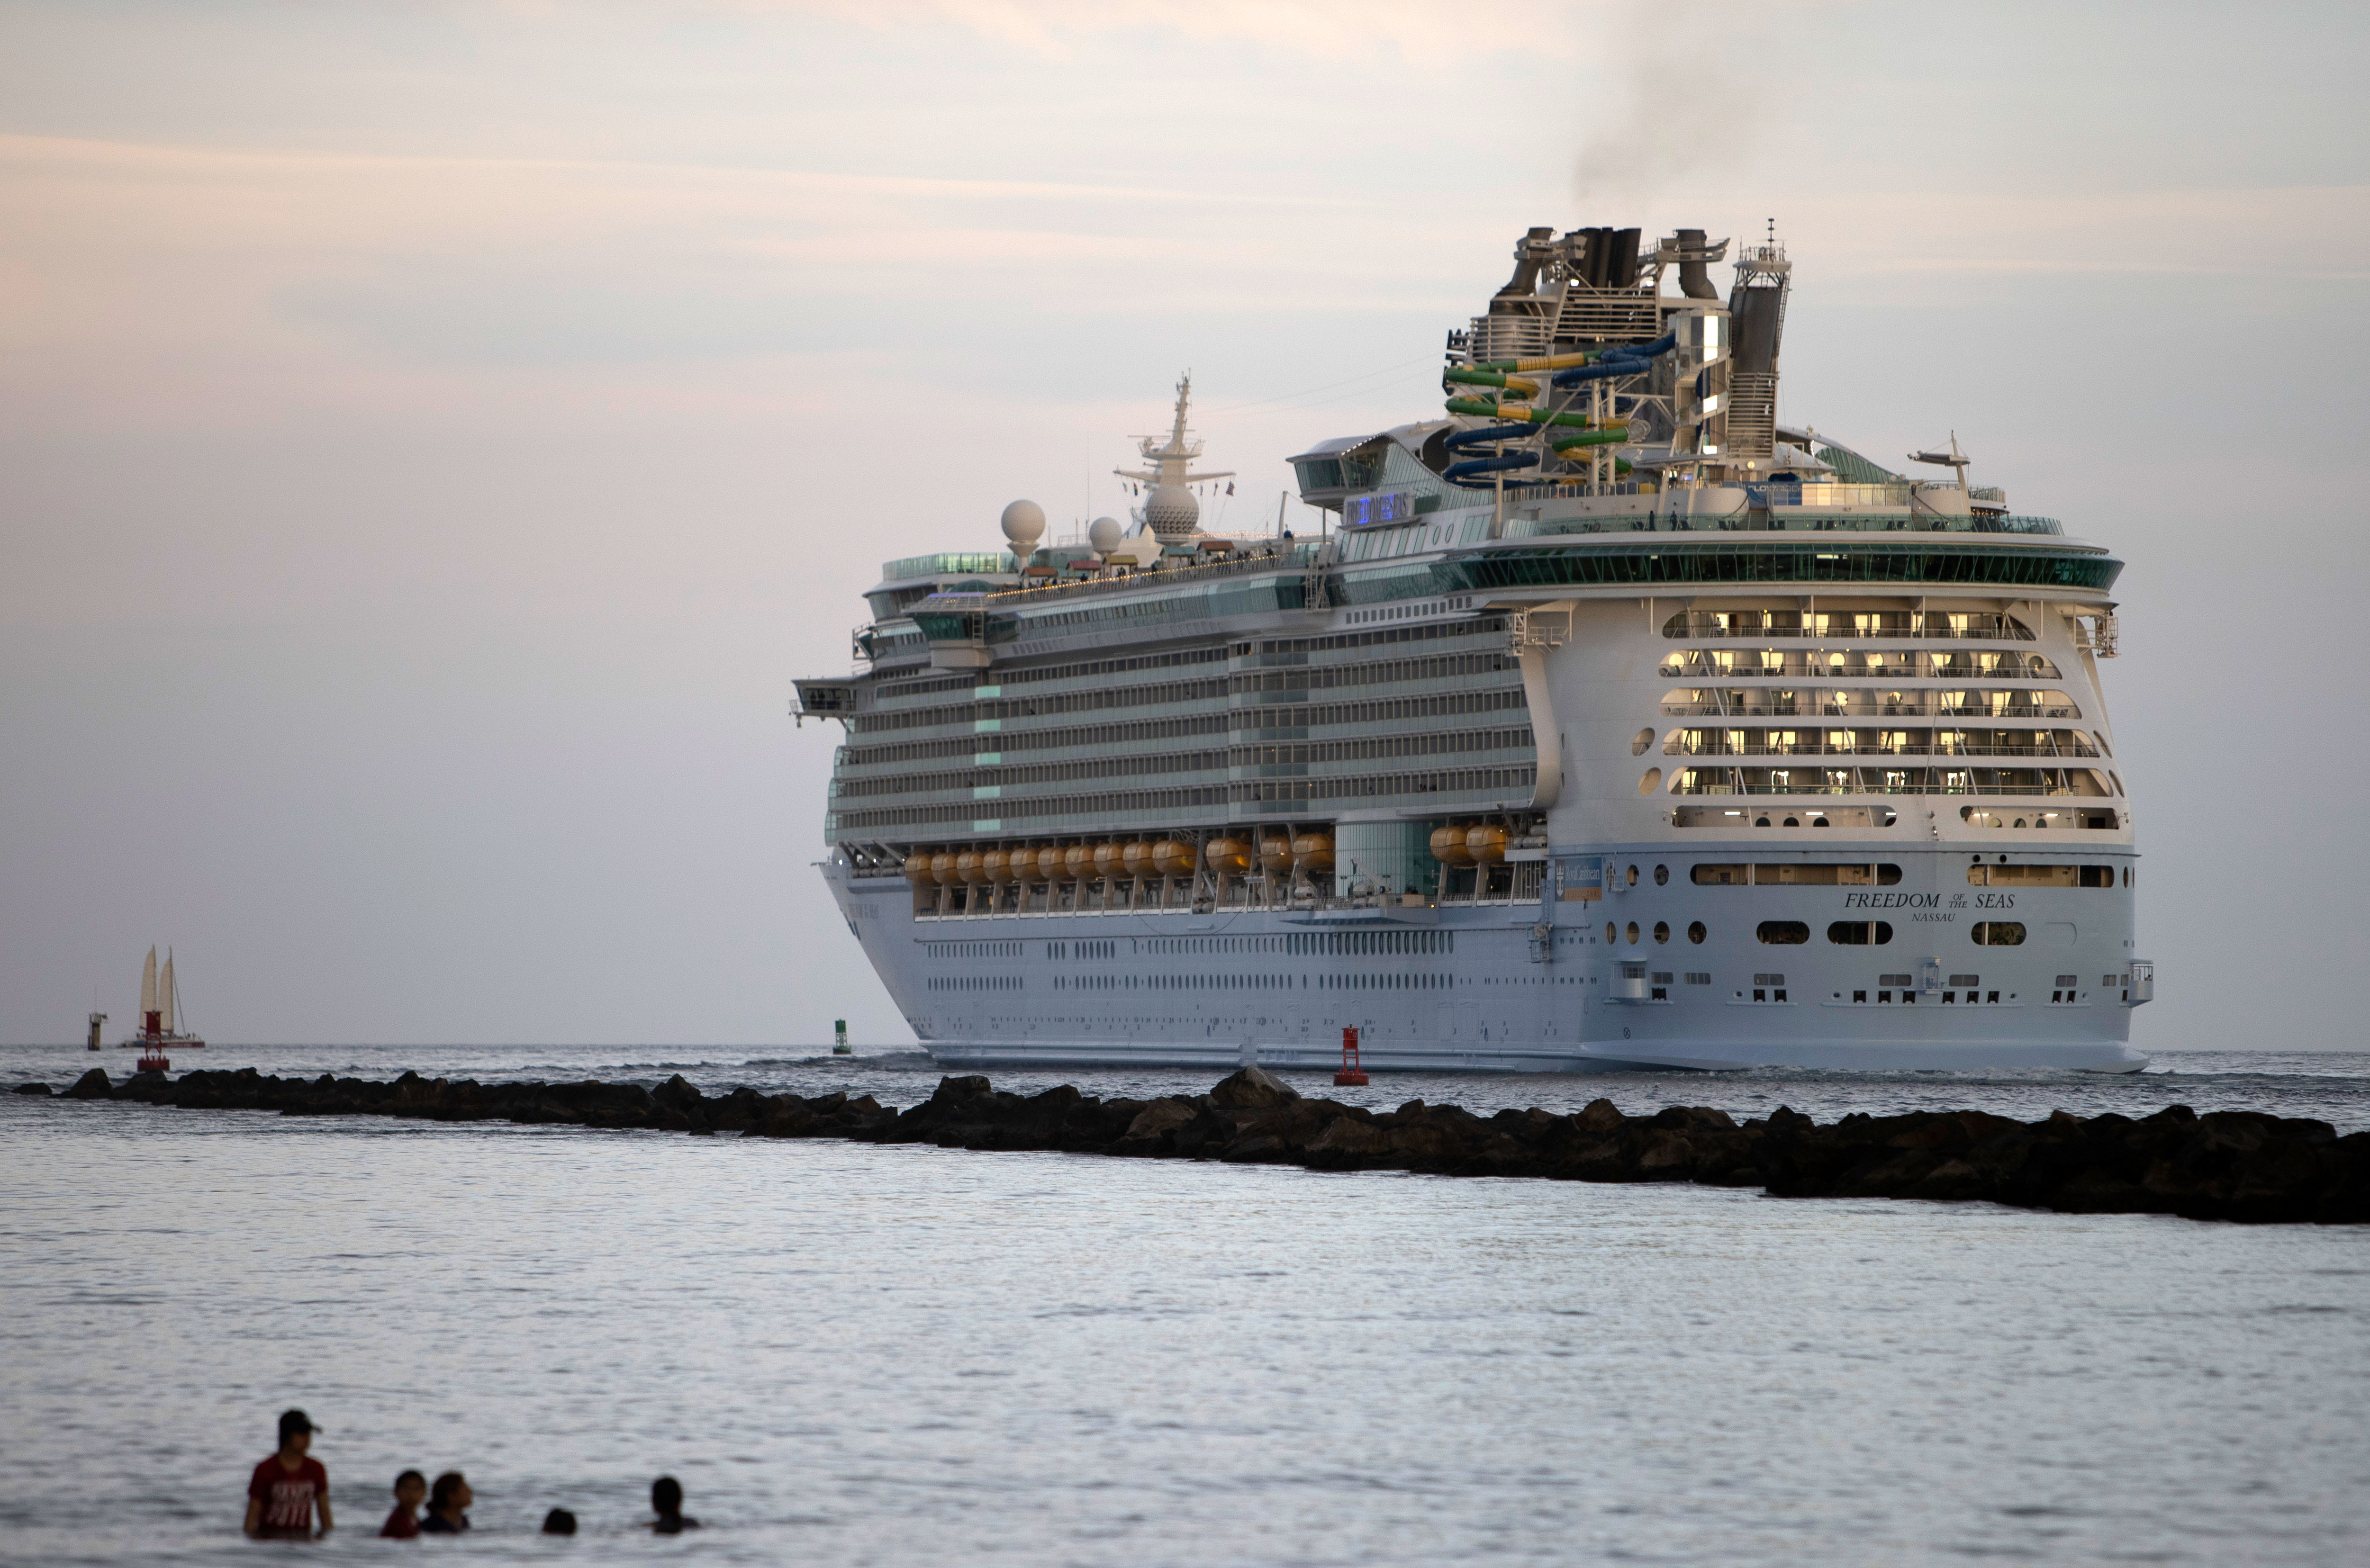 Royal Caribbean's Freedom of the Seas ship is seen at PortMiami in Florida on June 20, 2021, during a US trial cruise testing Covid-19 protocols.